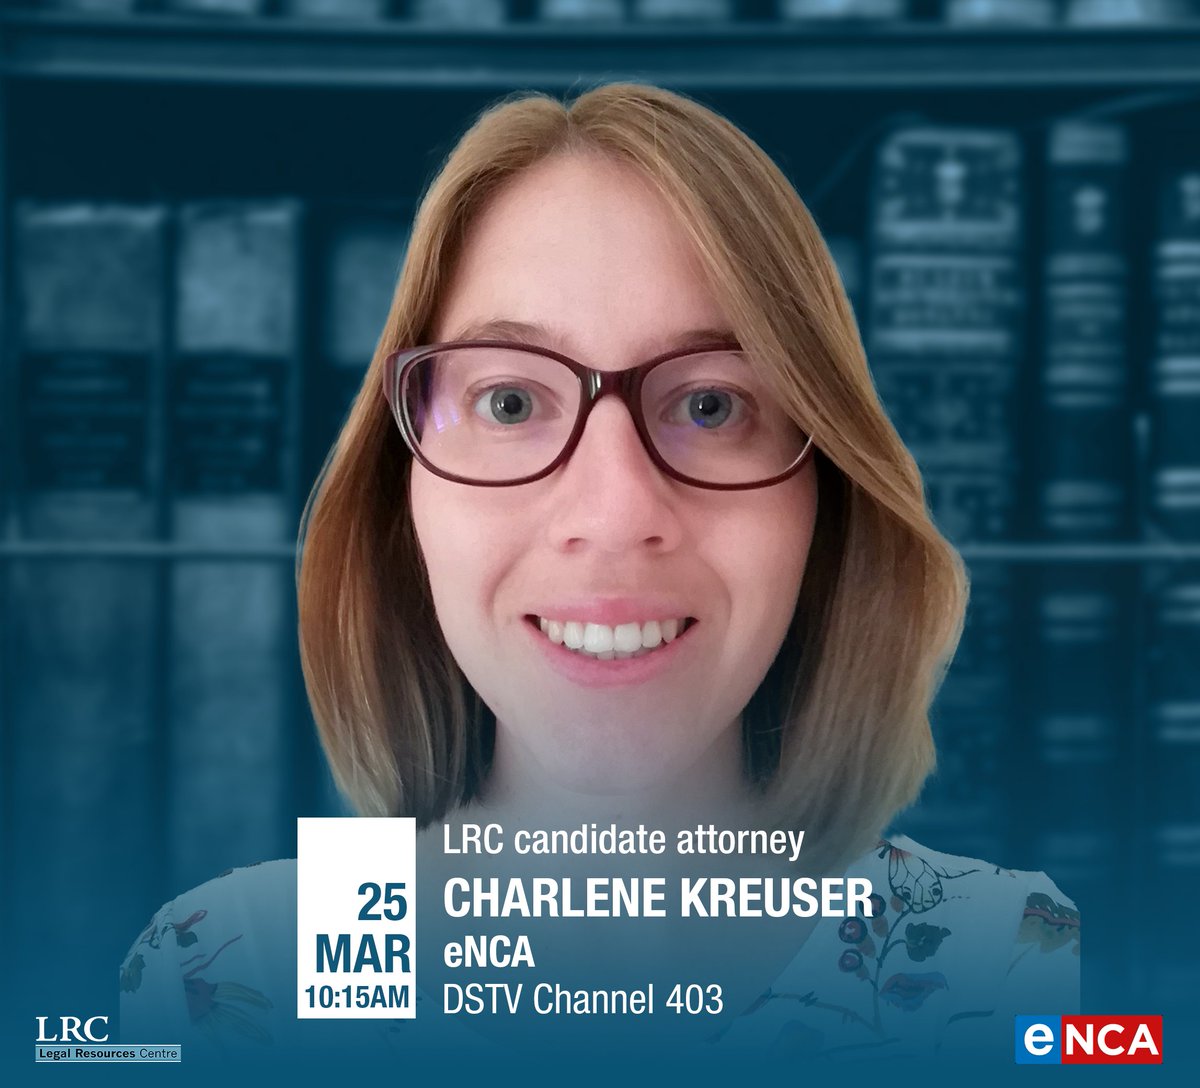 LRC candidate attorney Charlene Kreuser speaks to @eNCA this morning about how the Births and Deaths Registration Act excludes certain categories of children from having their births registered, and the legal action we're taking to ensure their inclusion.